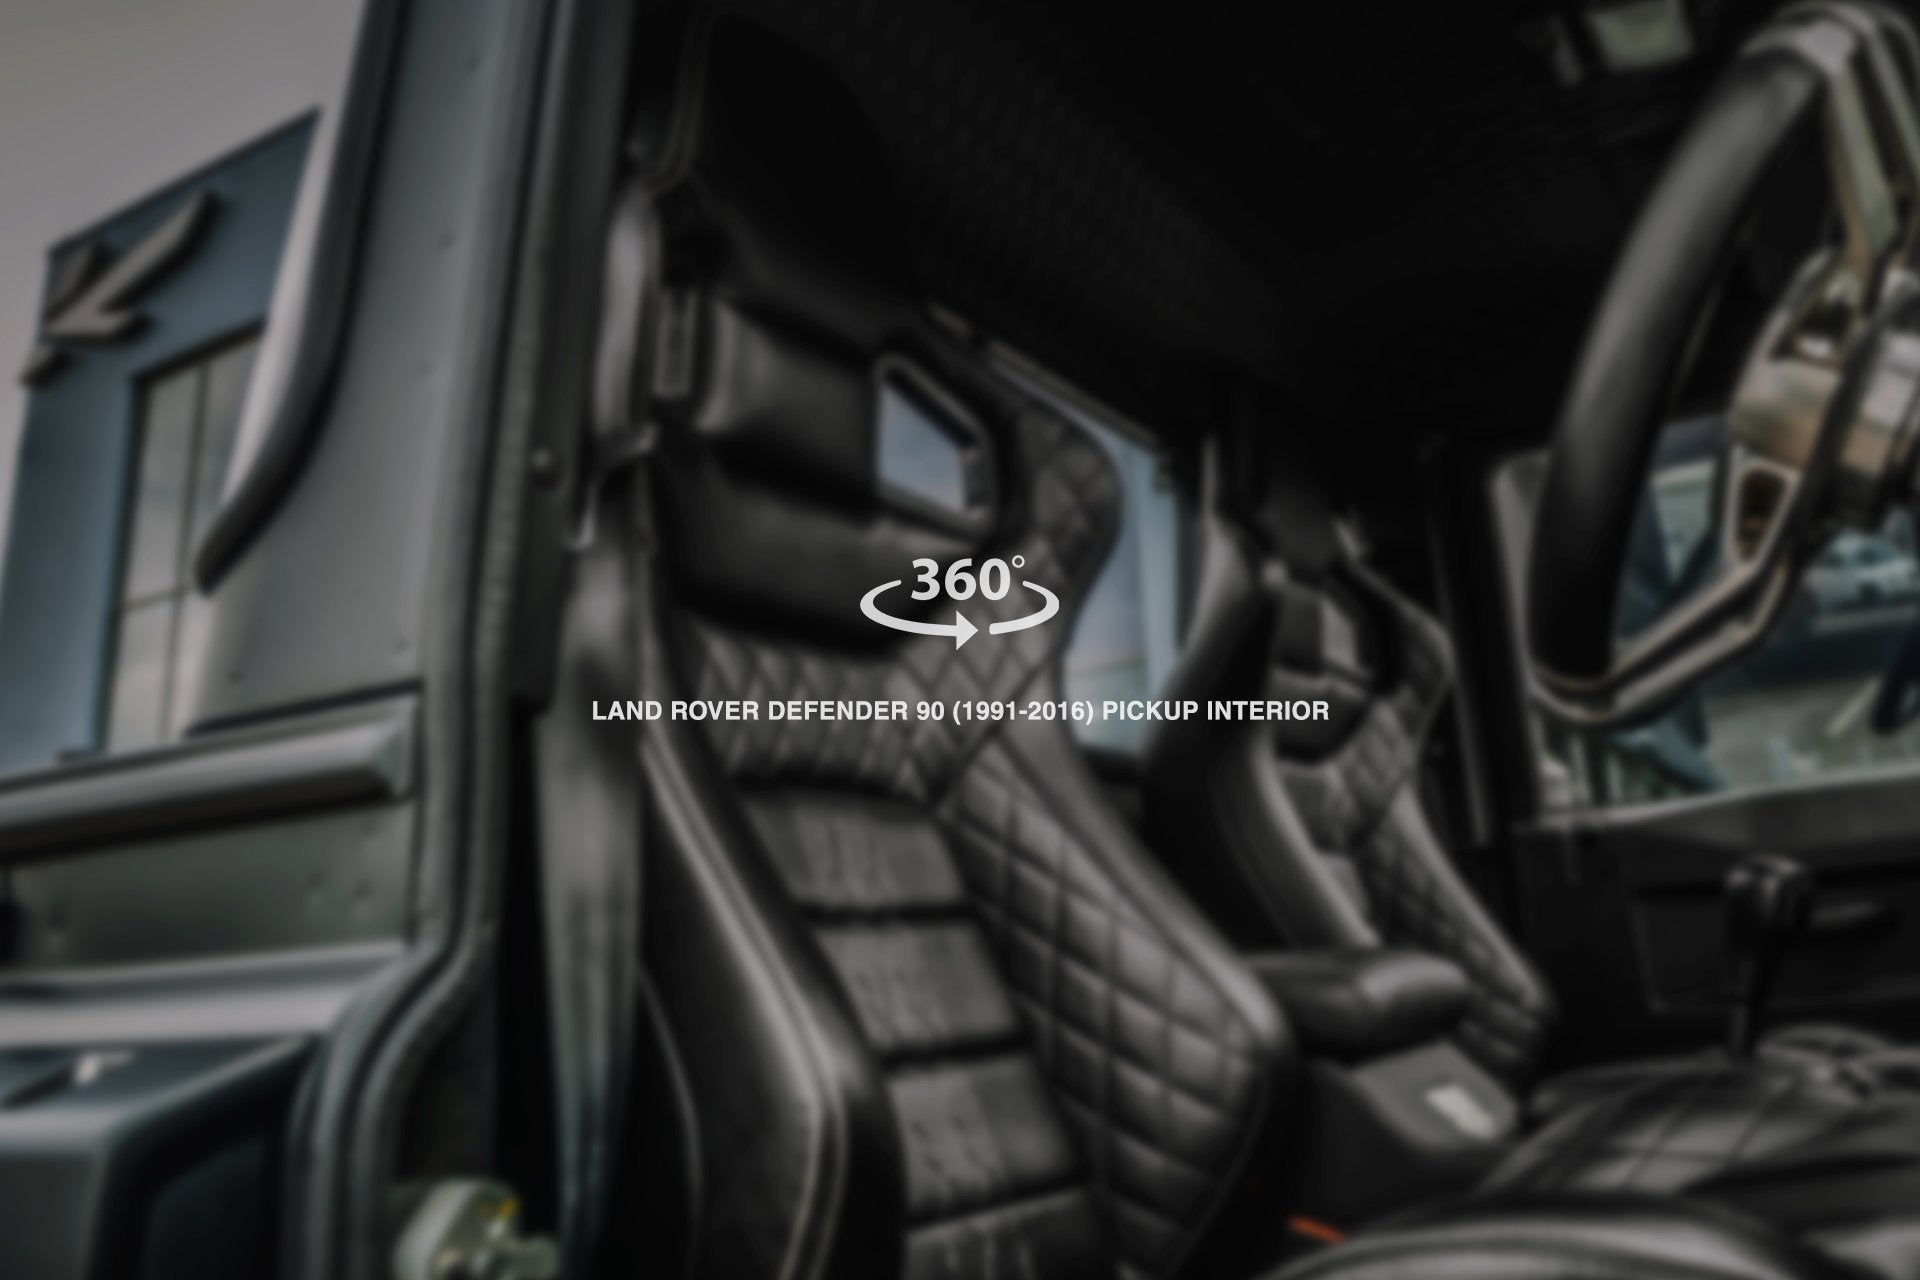 LAND ROVER DEFENDER 90 (1991-2016) PICKUP 2 SEATS SPORT Leather Interior 360° Tour